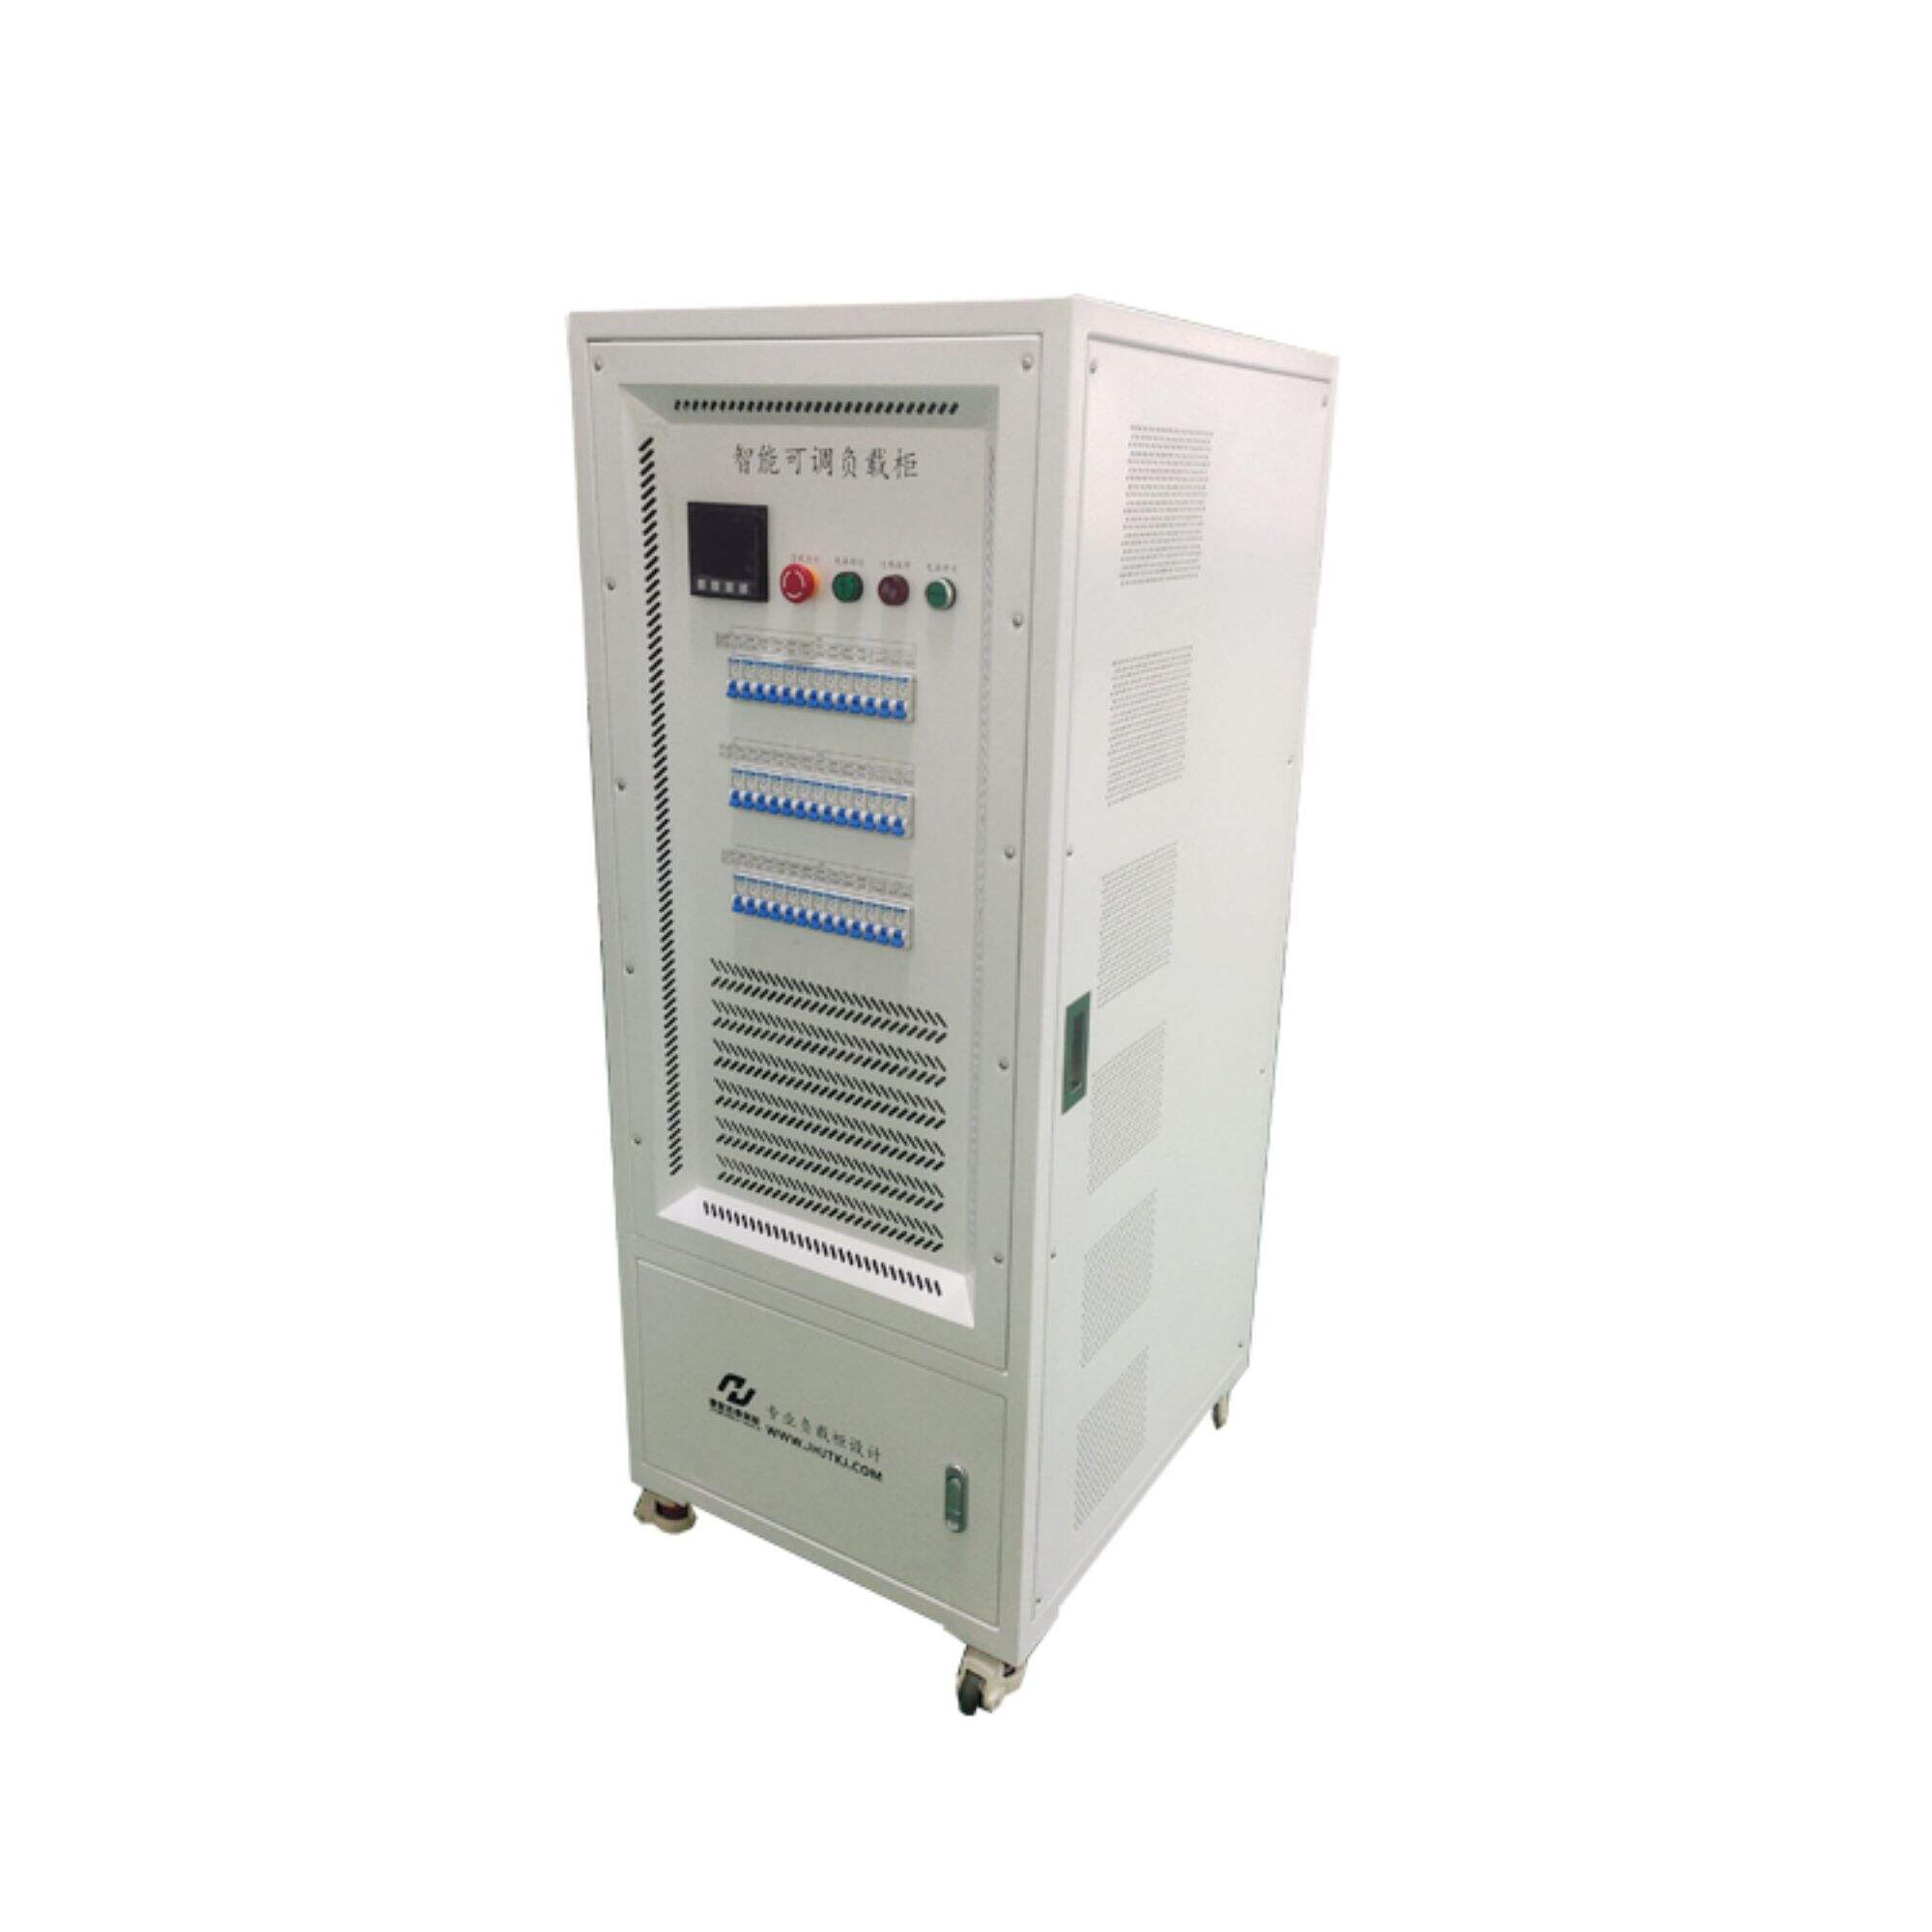 For power supply testing JH-RCL-10KWA220A110-W12K adjustable Program control load bank